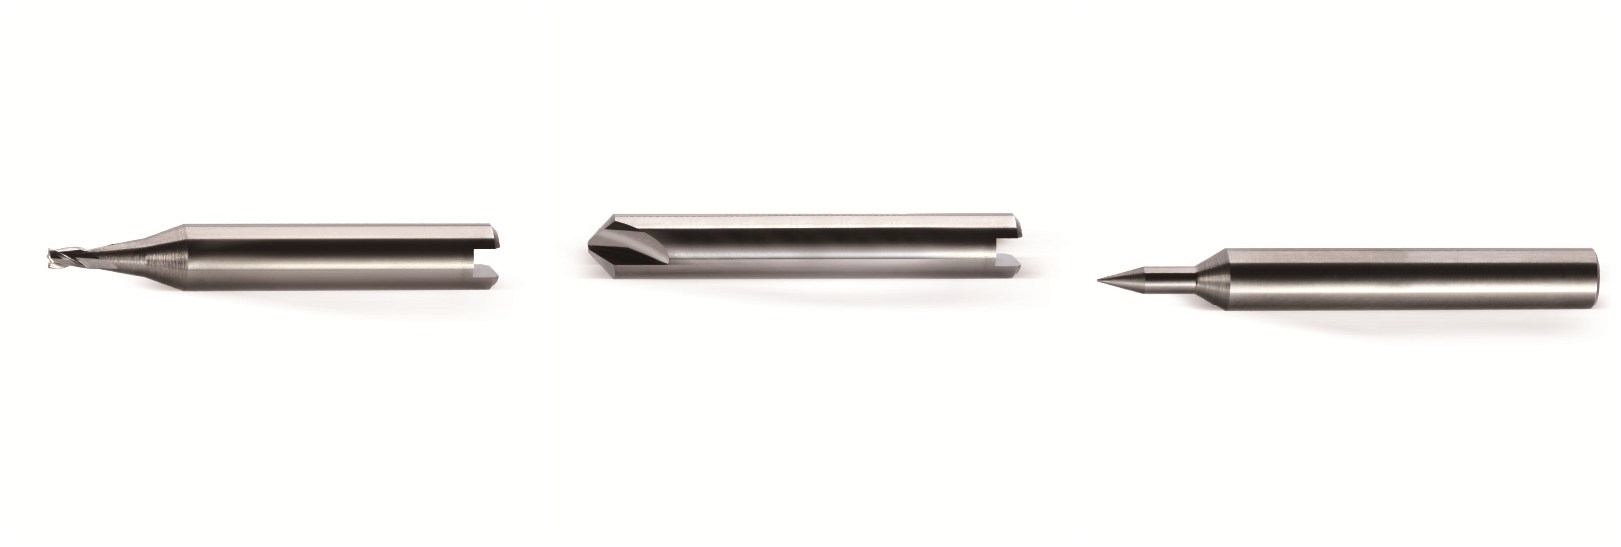 solid carbide end millcutter and tracer point for viper